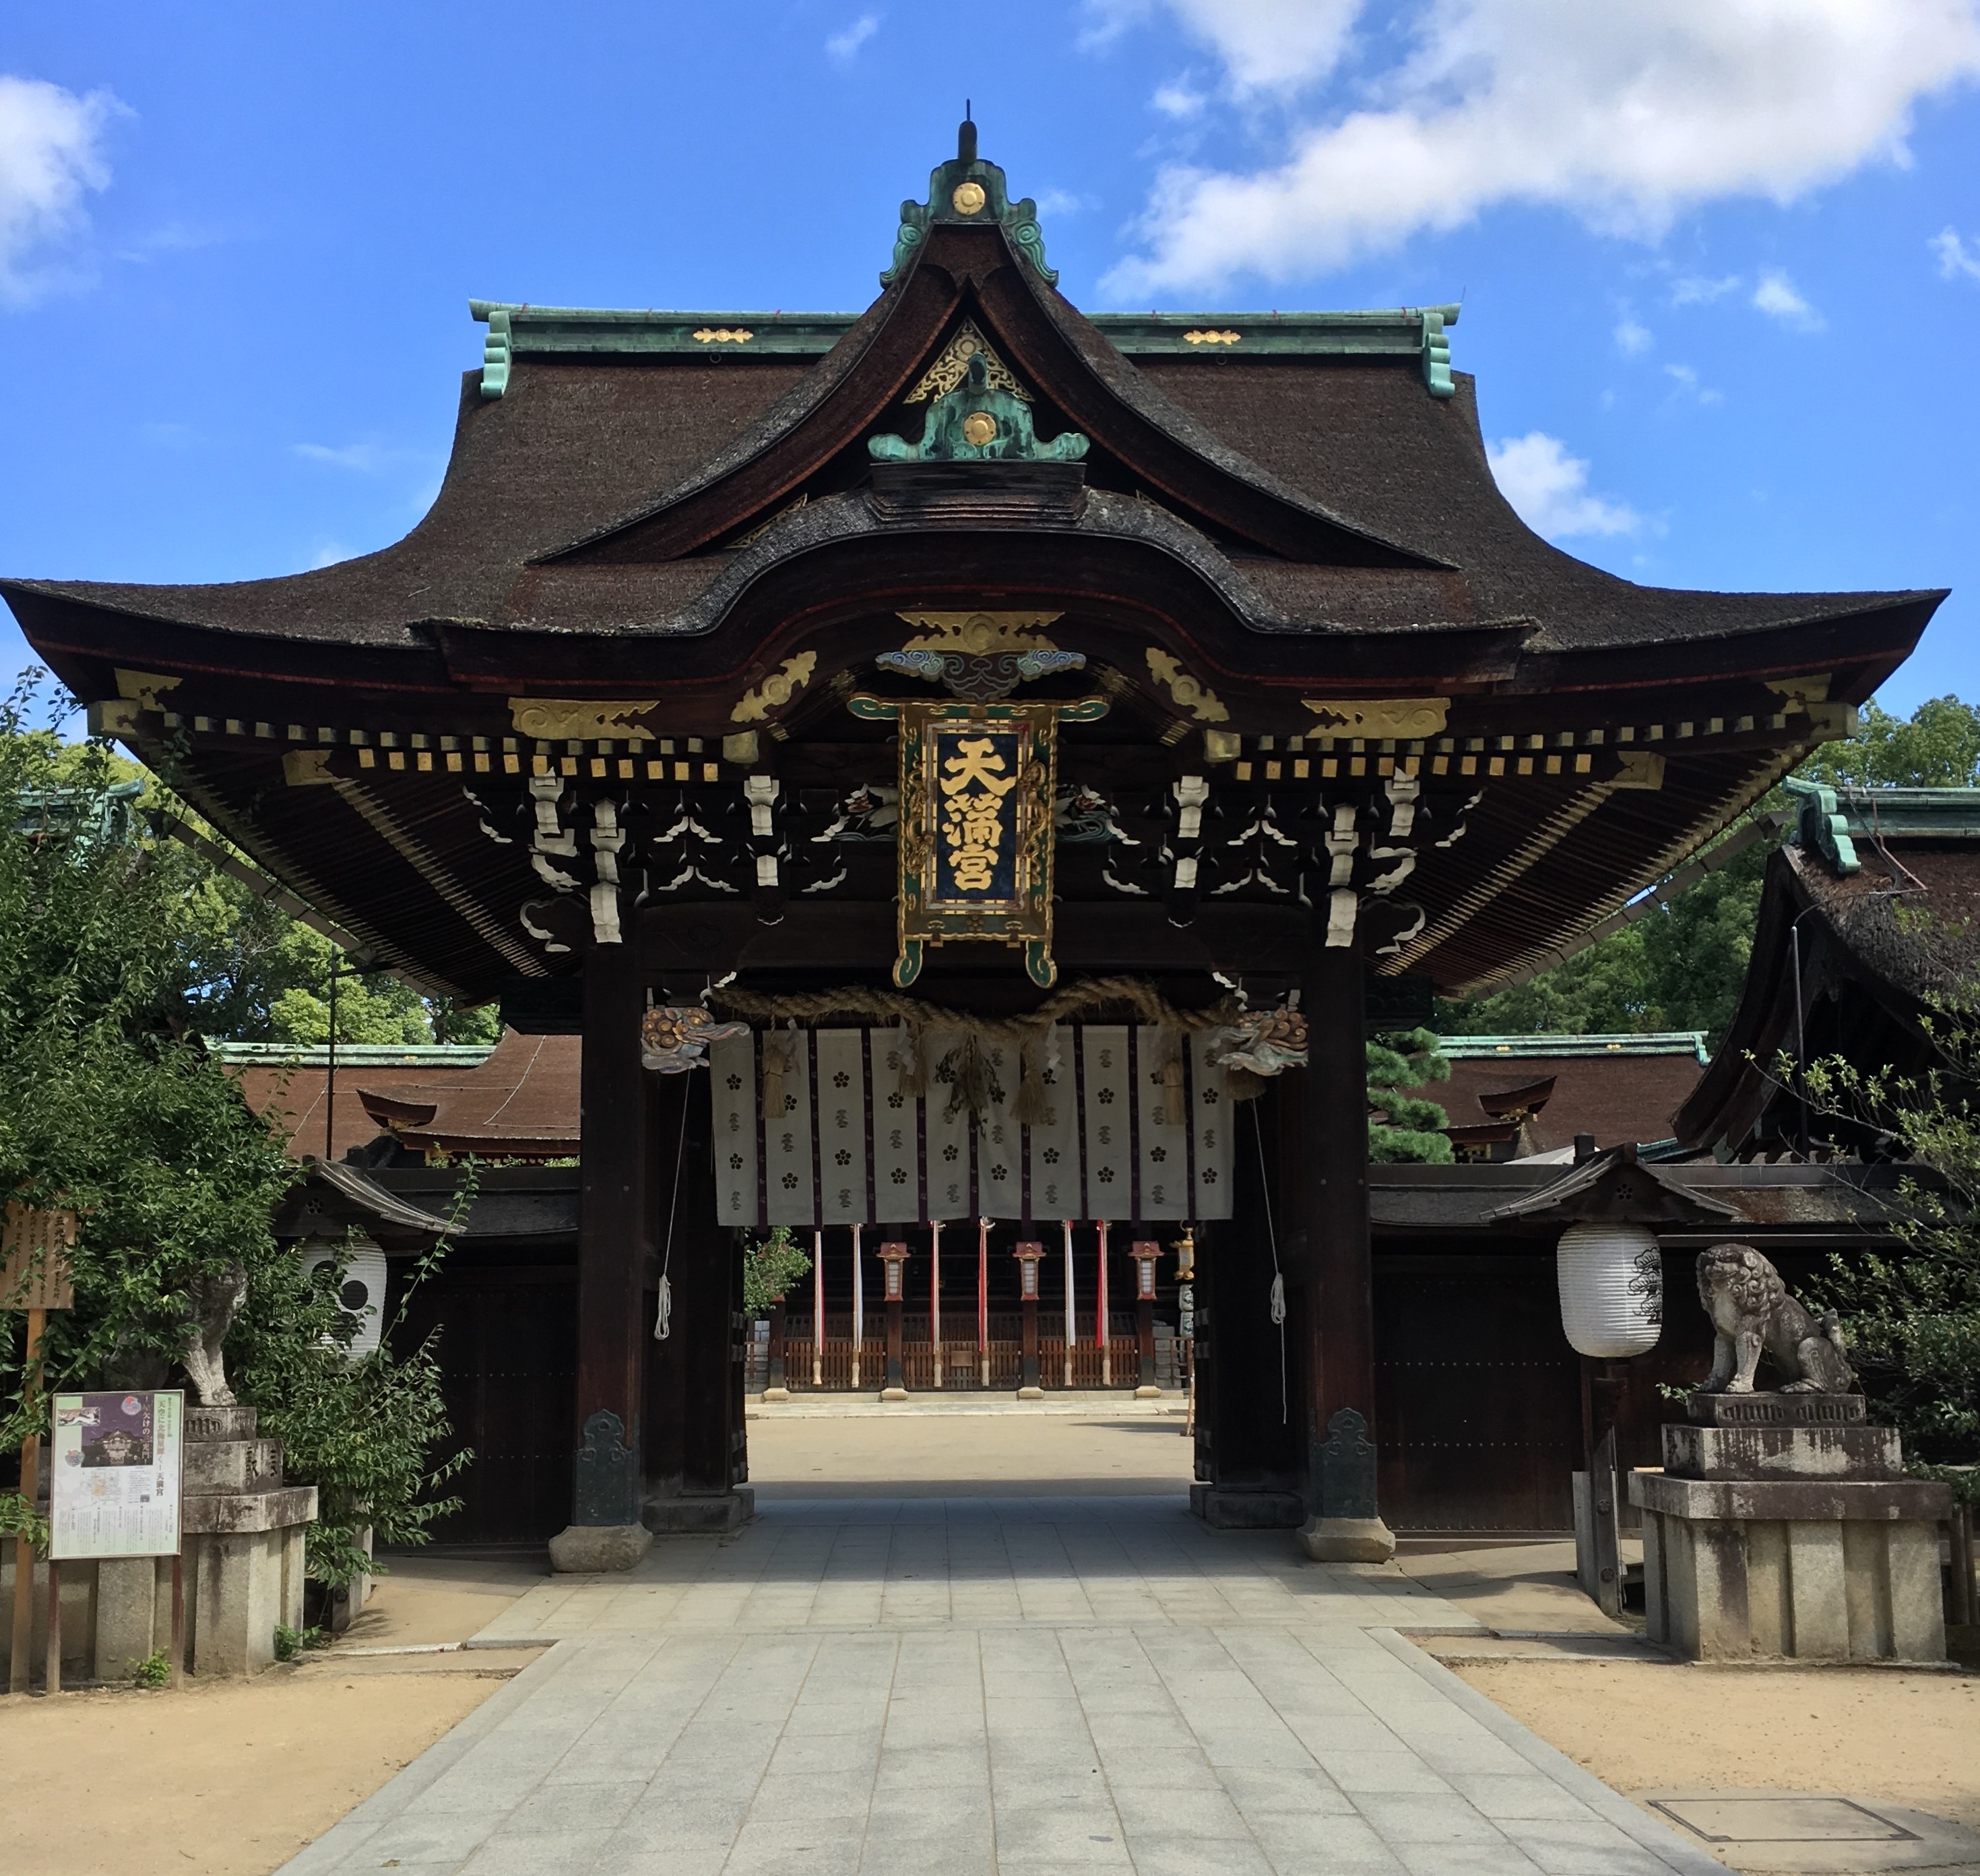 iconic gate at kitano tenmangu shrine with large name plate in gold lettering